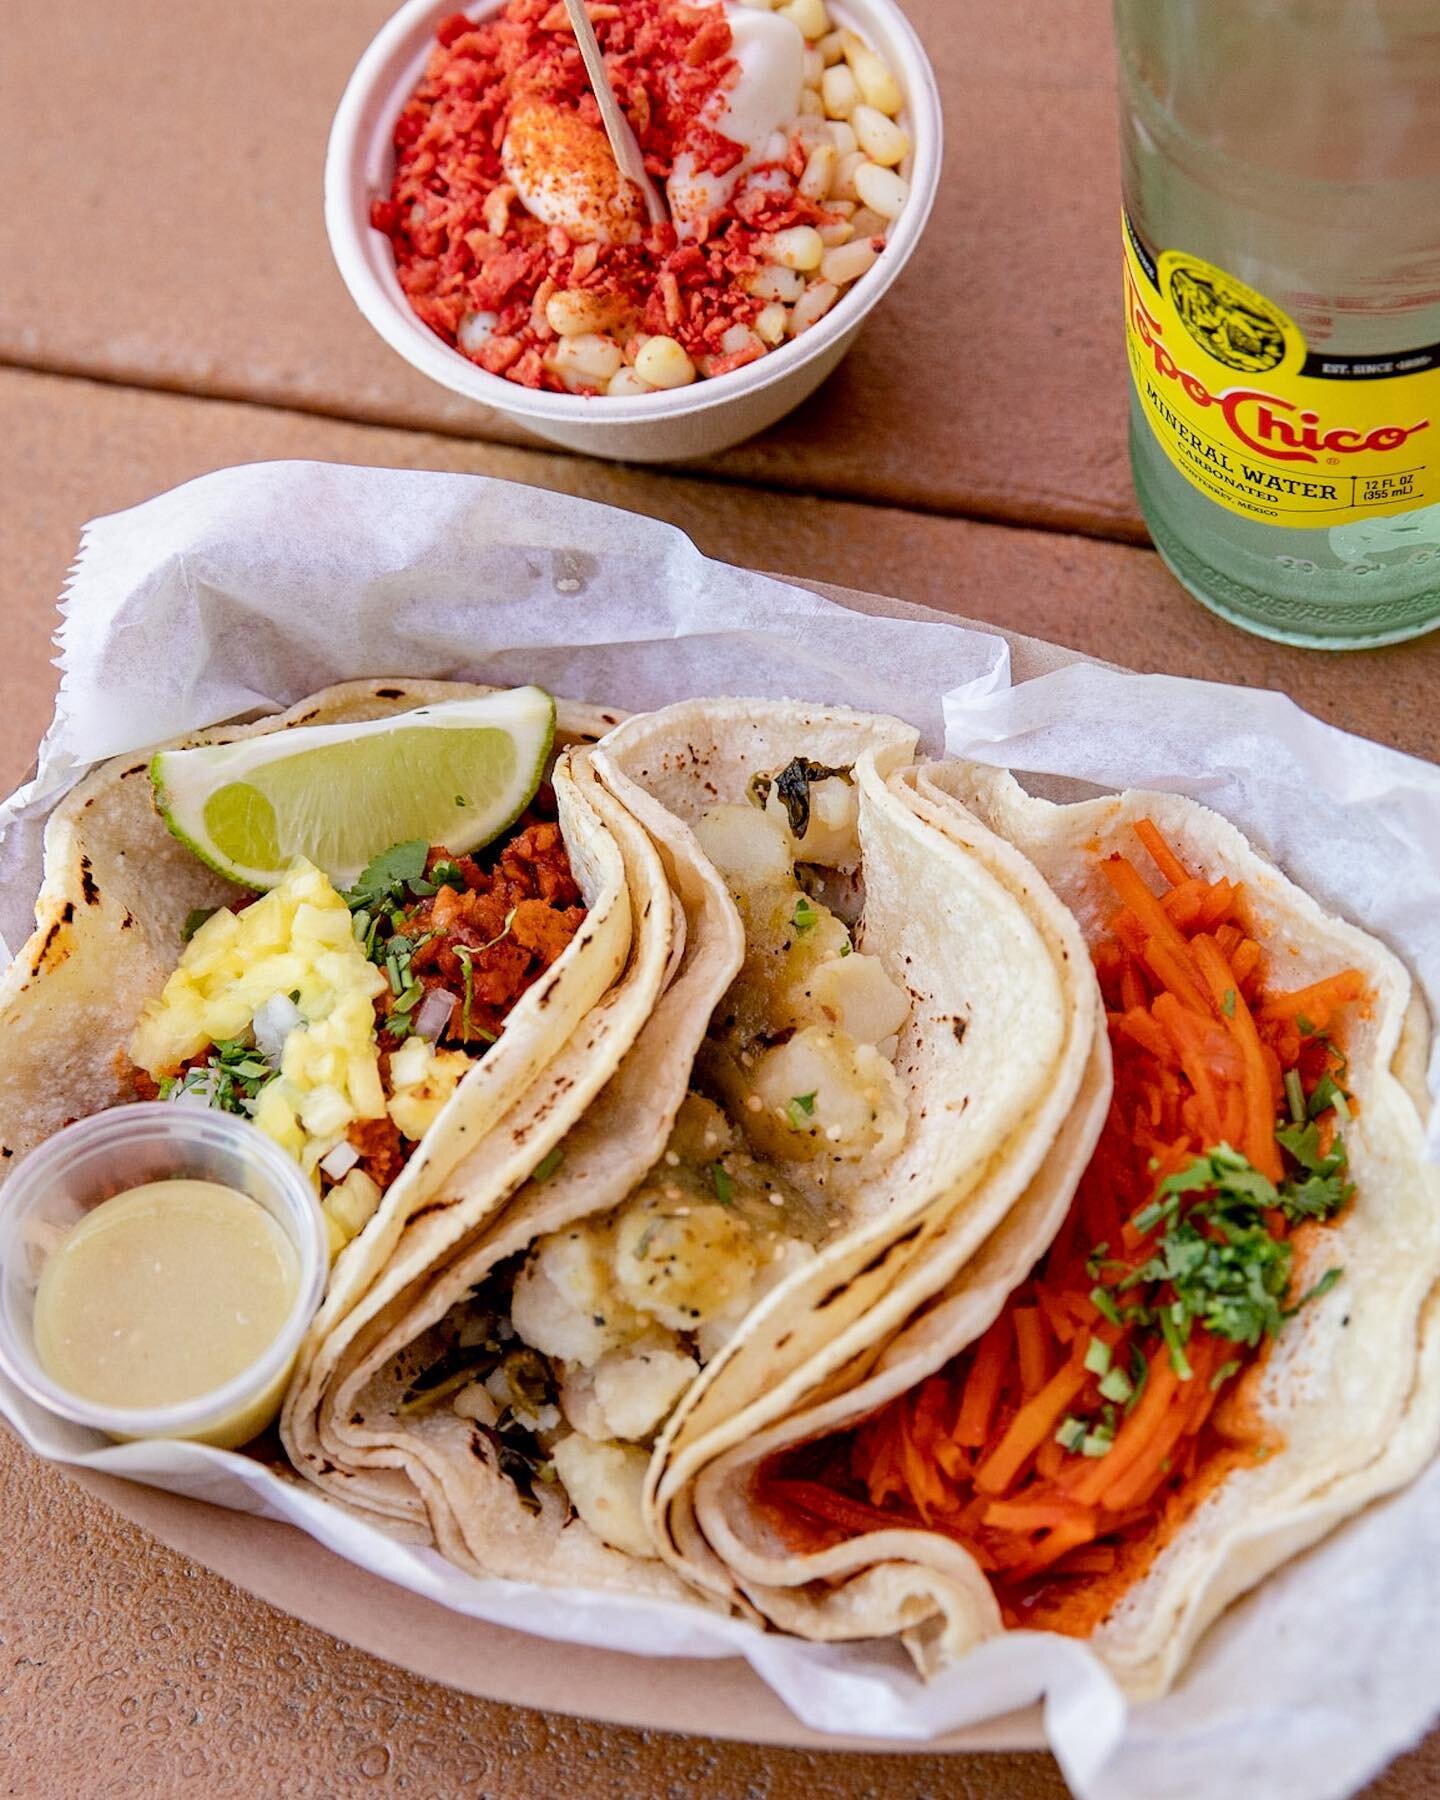 It&rsquo;s #tacotuesday and y&rsquo;all need to make plans to try @succulentvegantacos !!! Whether you&rsquo;re vegan or the biggest carnivore, these tacos and sides (the esquites are a must order) are straight fire. And to make things even better, t